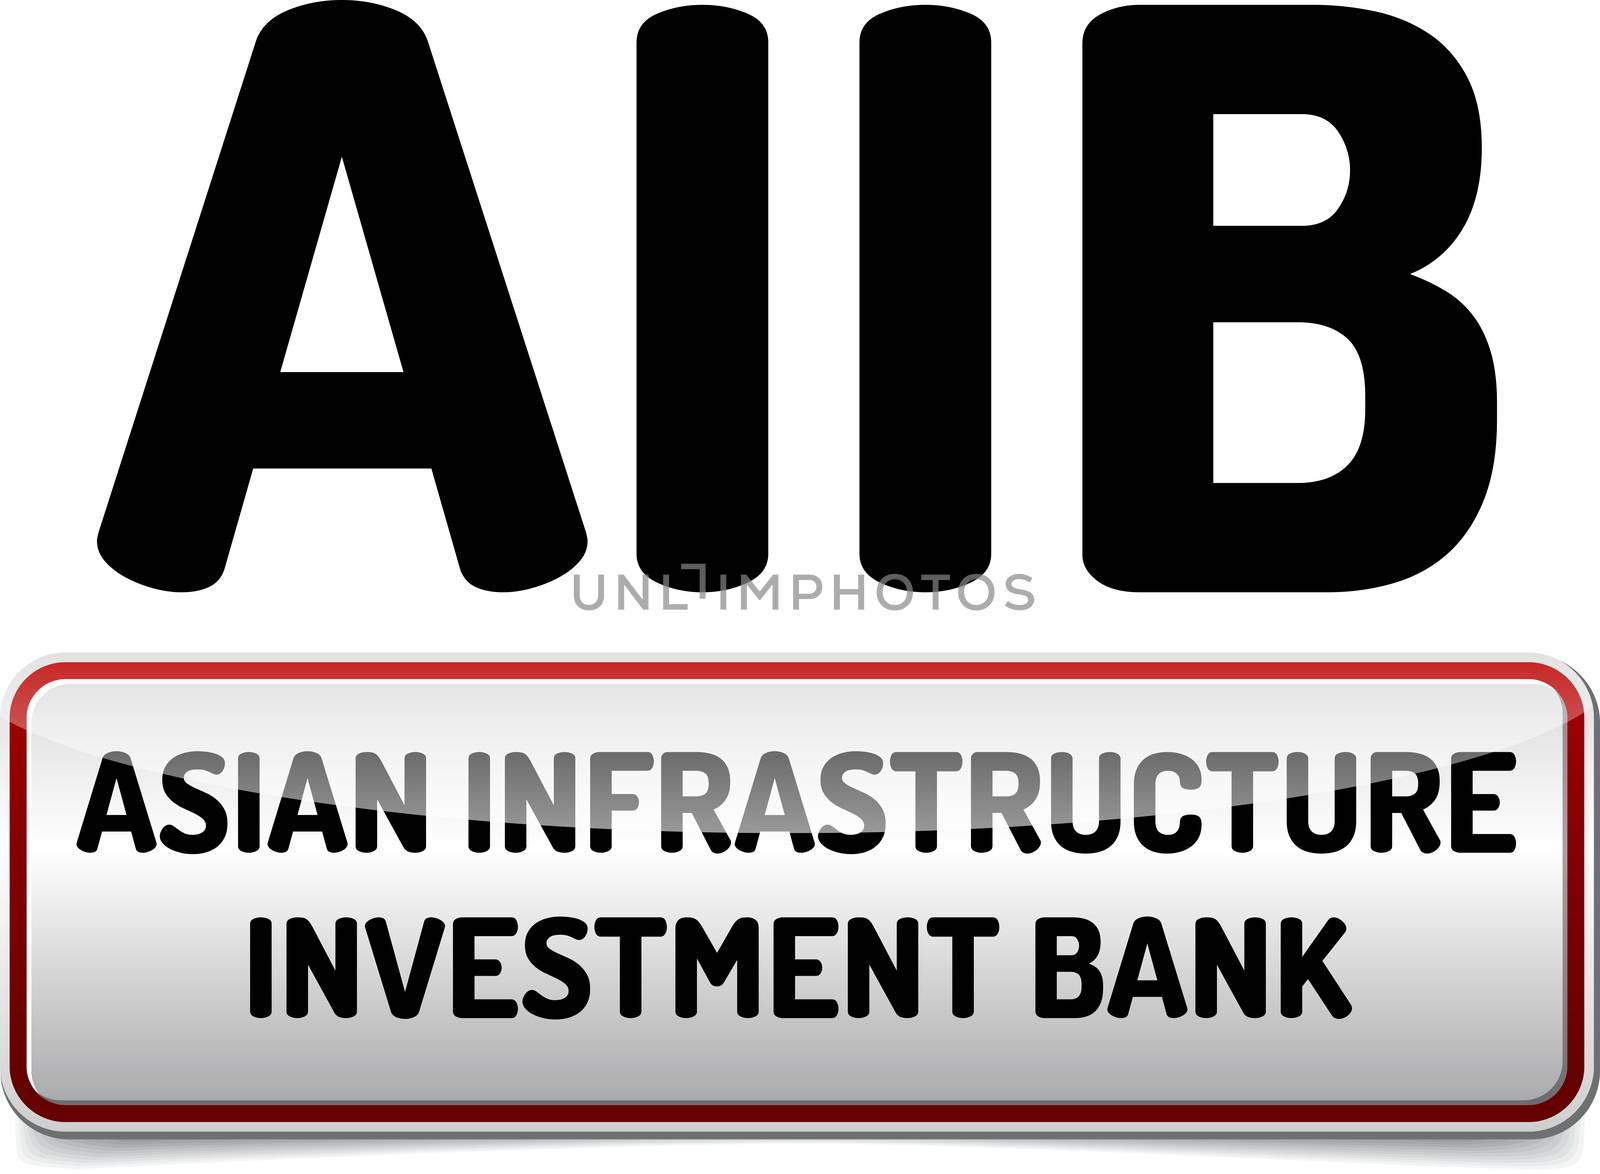 AIIB - The Asian Infrastructure Investment Bank - Illustration board with reflection and shadow on white background